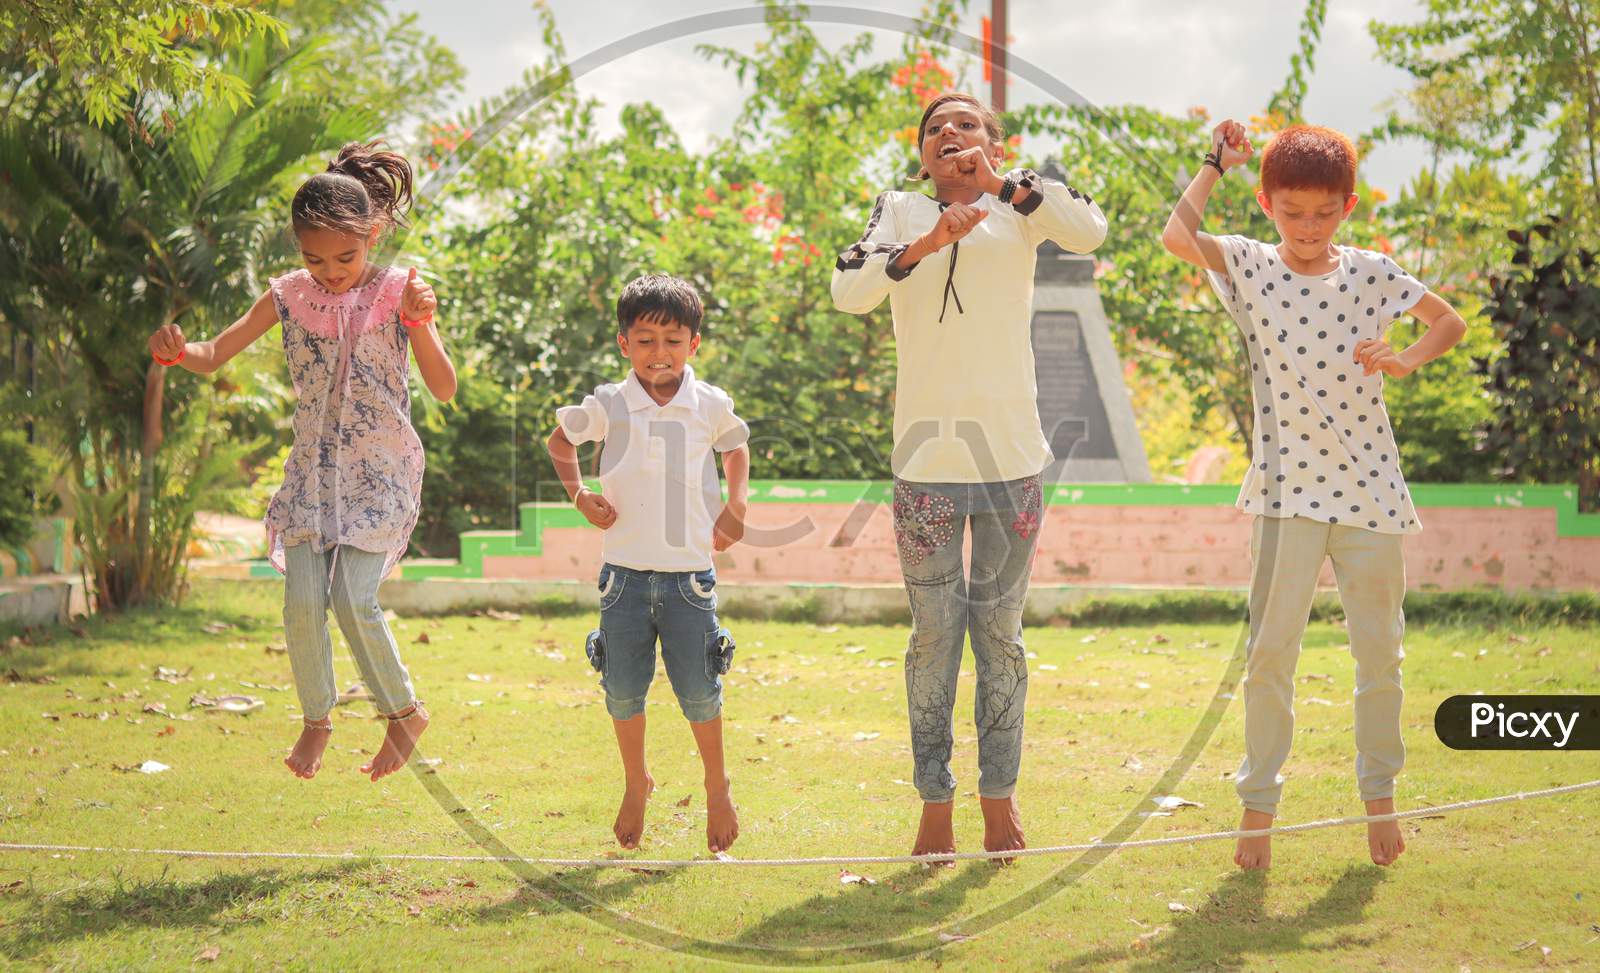 Children's Playing Traditional Games At a Park, Outdoors - Concept Of Kids Enjoying Outdoor Games In Technology-Driven World.